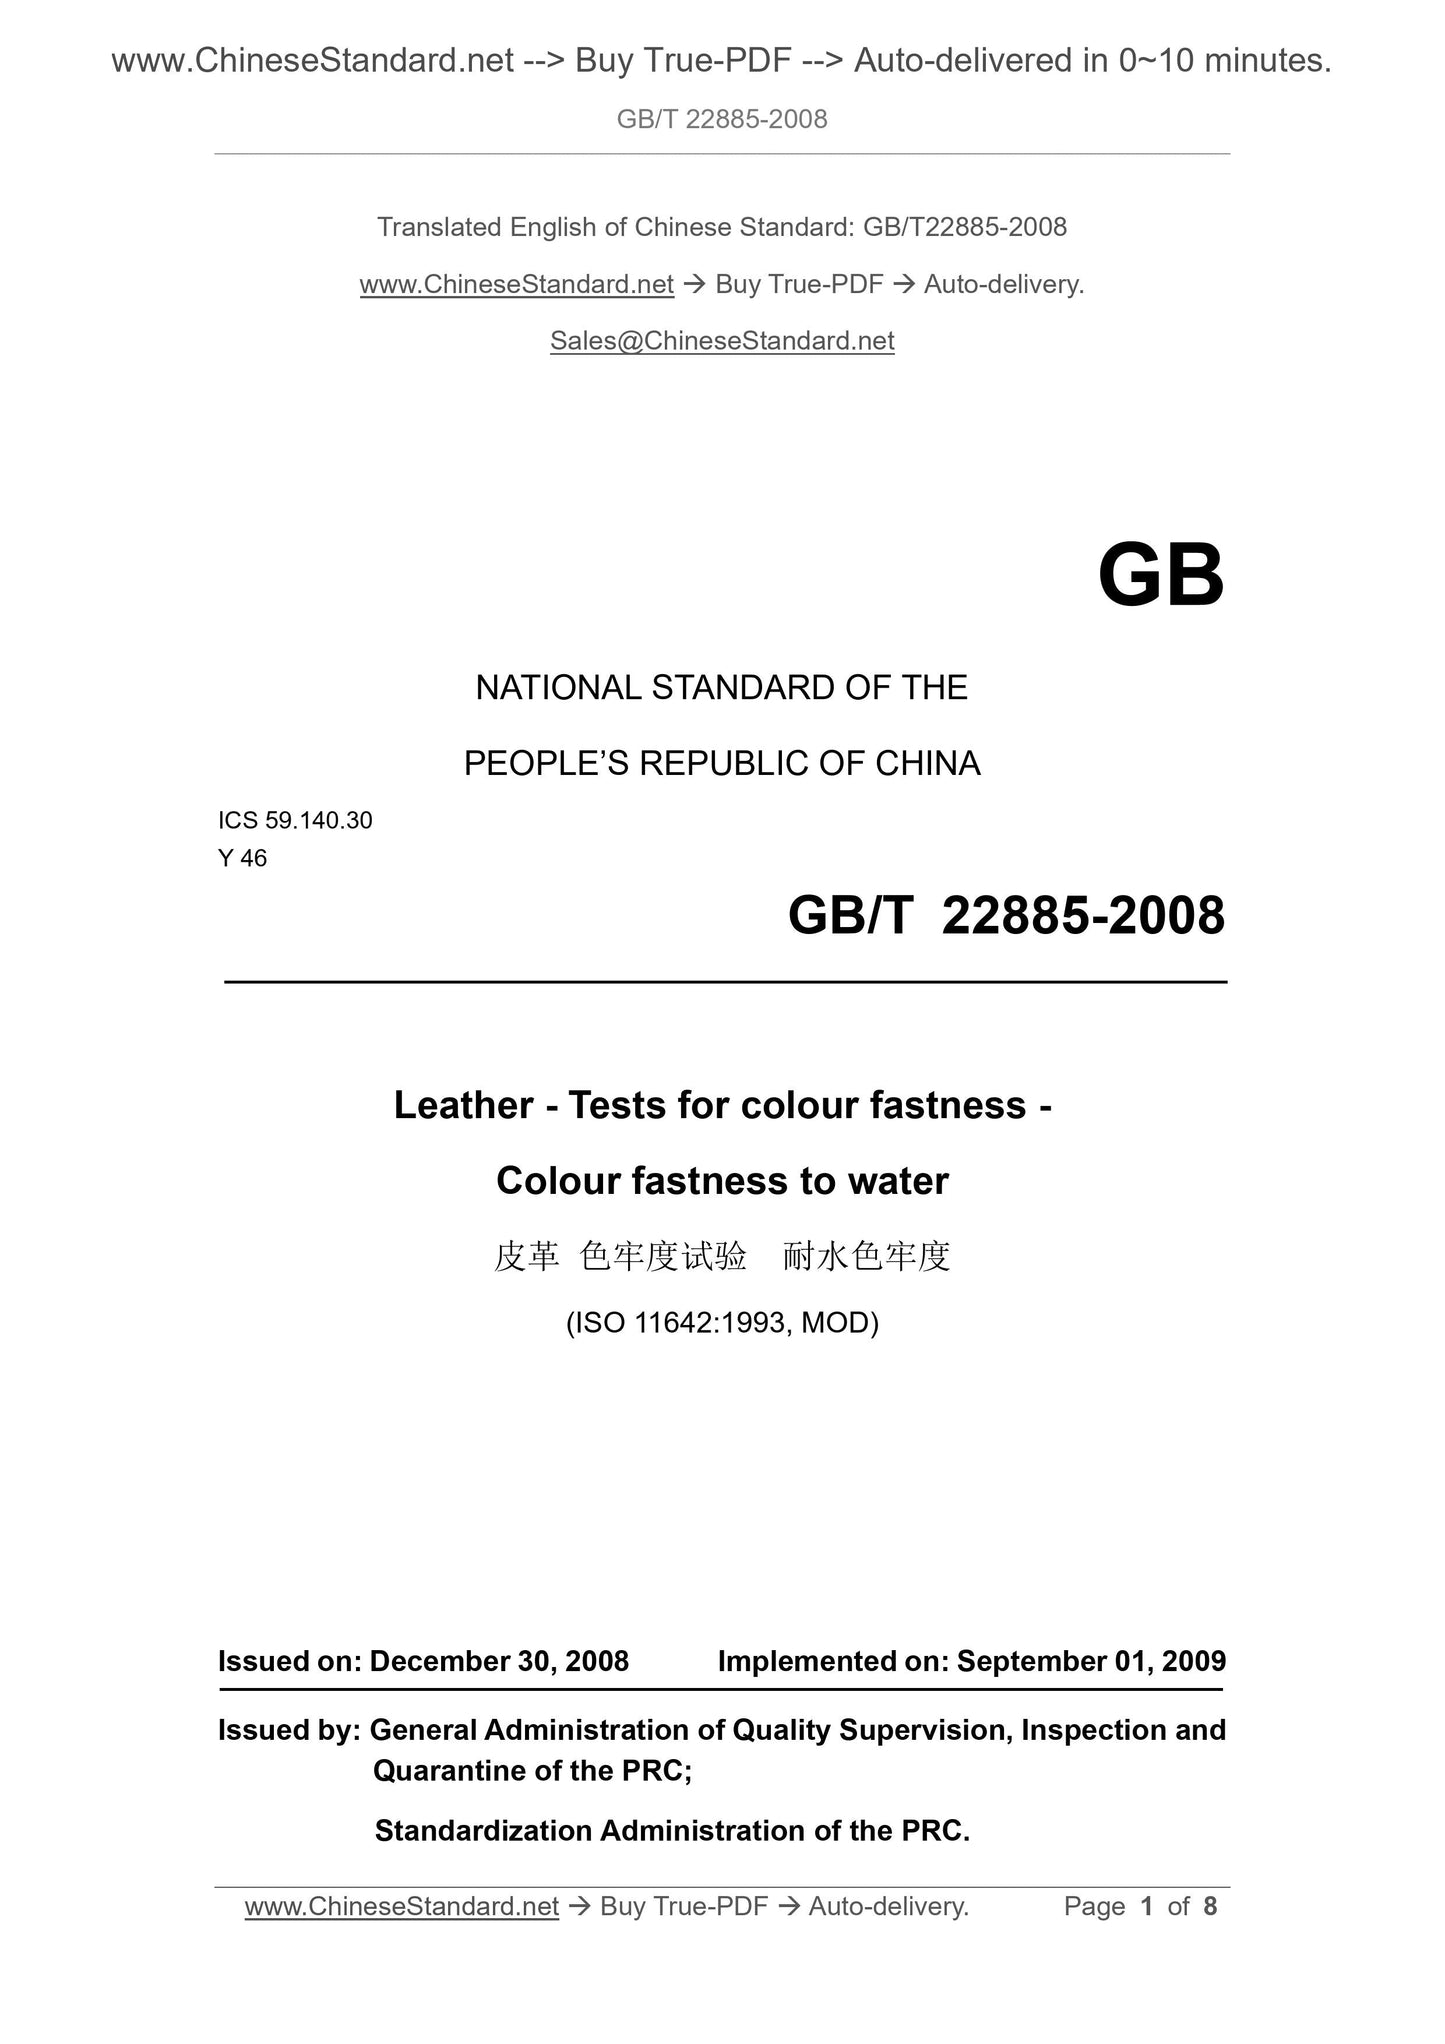 GB/T 22885-2008 Page 1